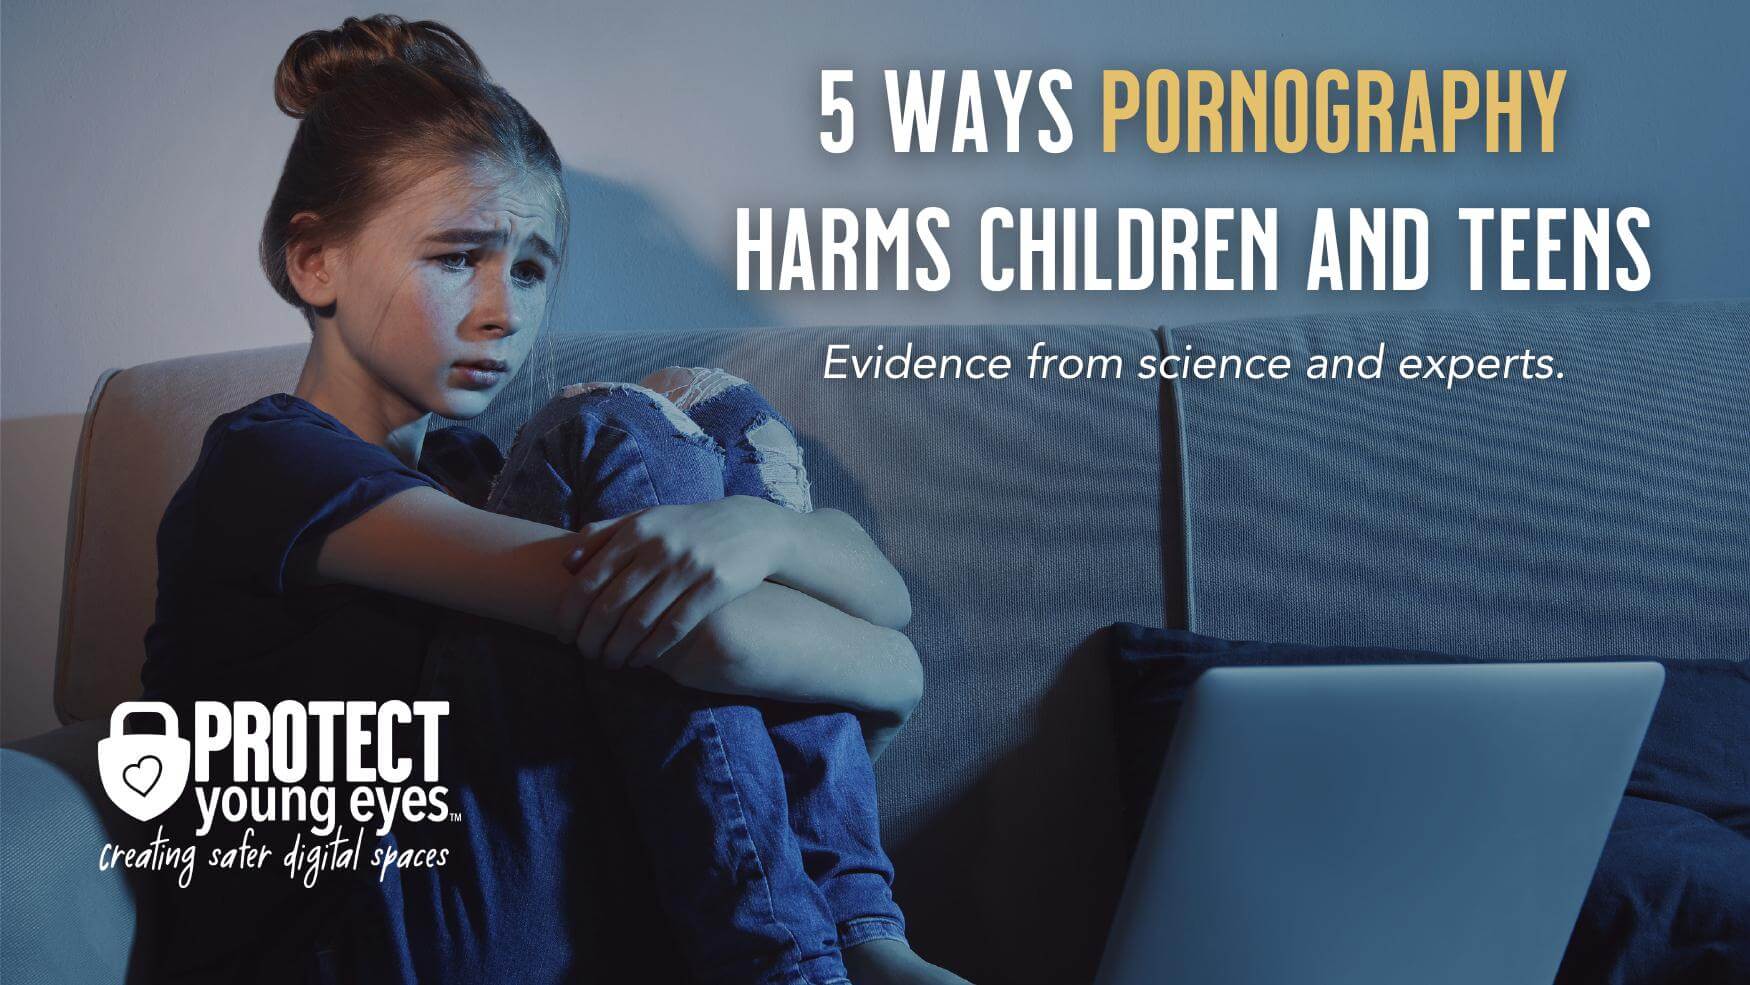 5 Ways Pornography Harms Children and Teens - Protect Young Eyes